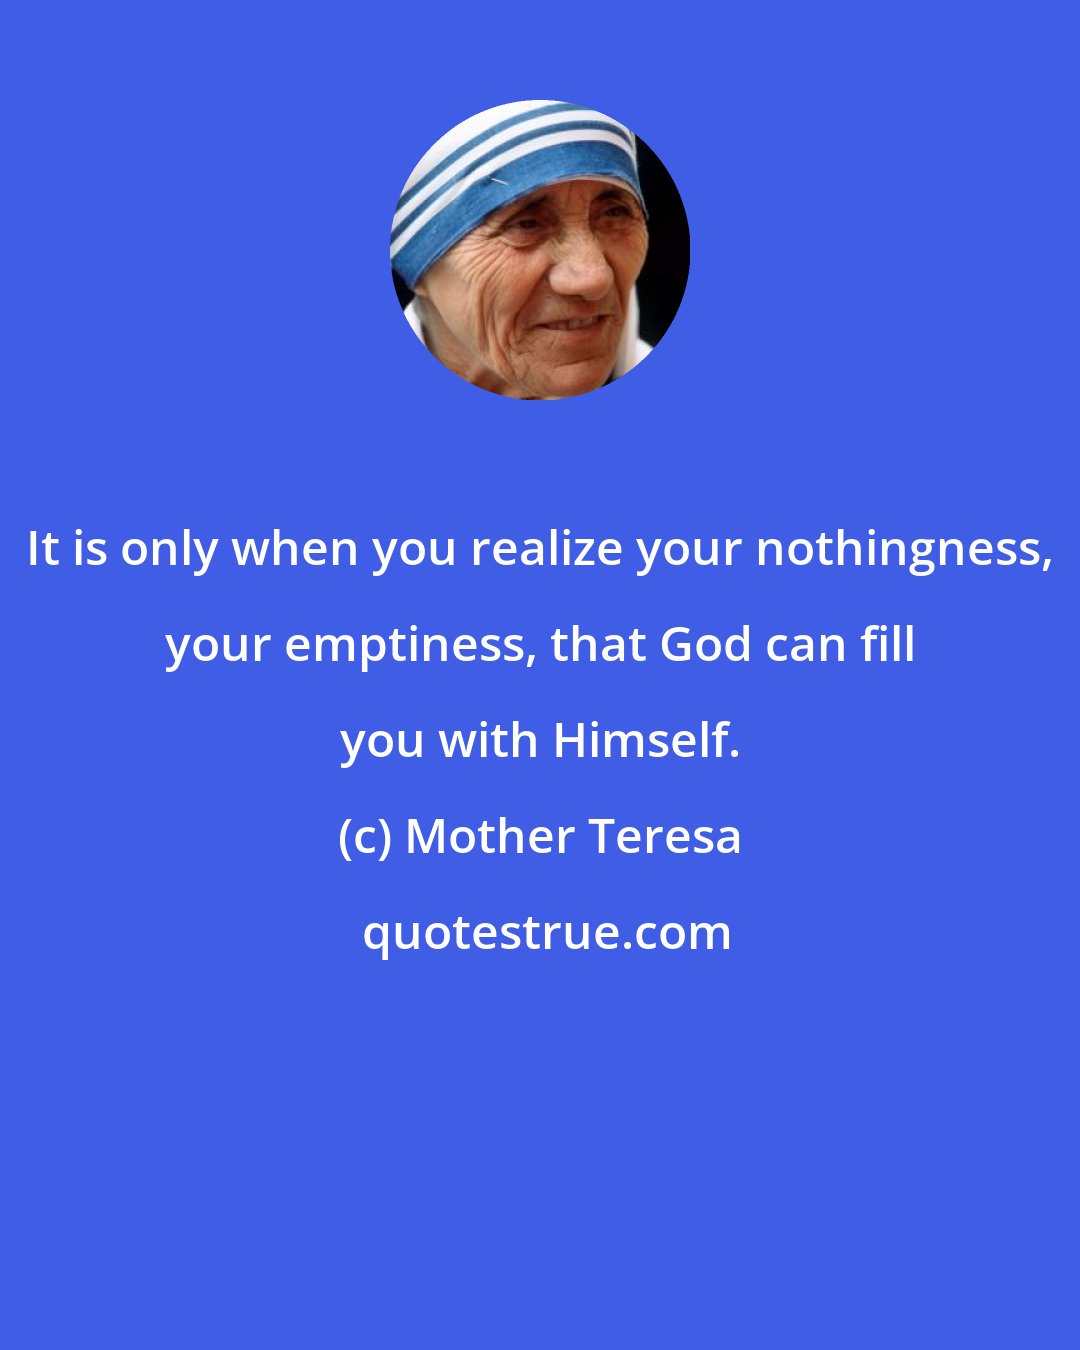 Mother Teresa: It is only when you realize your nothingness, your emptiness, that God can fill you with Himself.